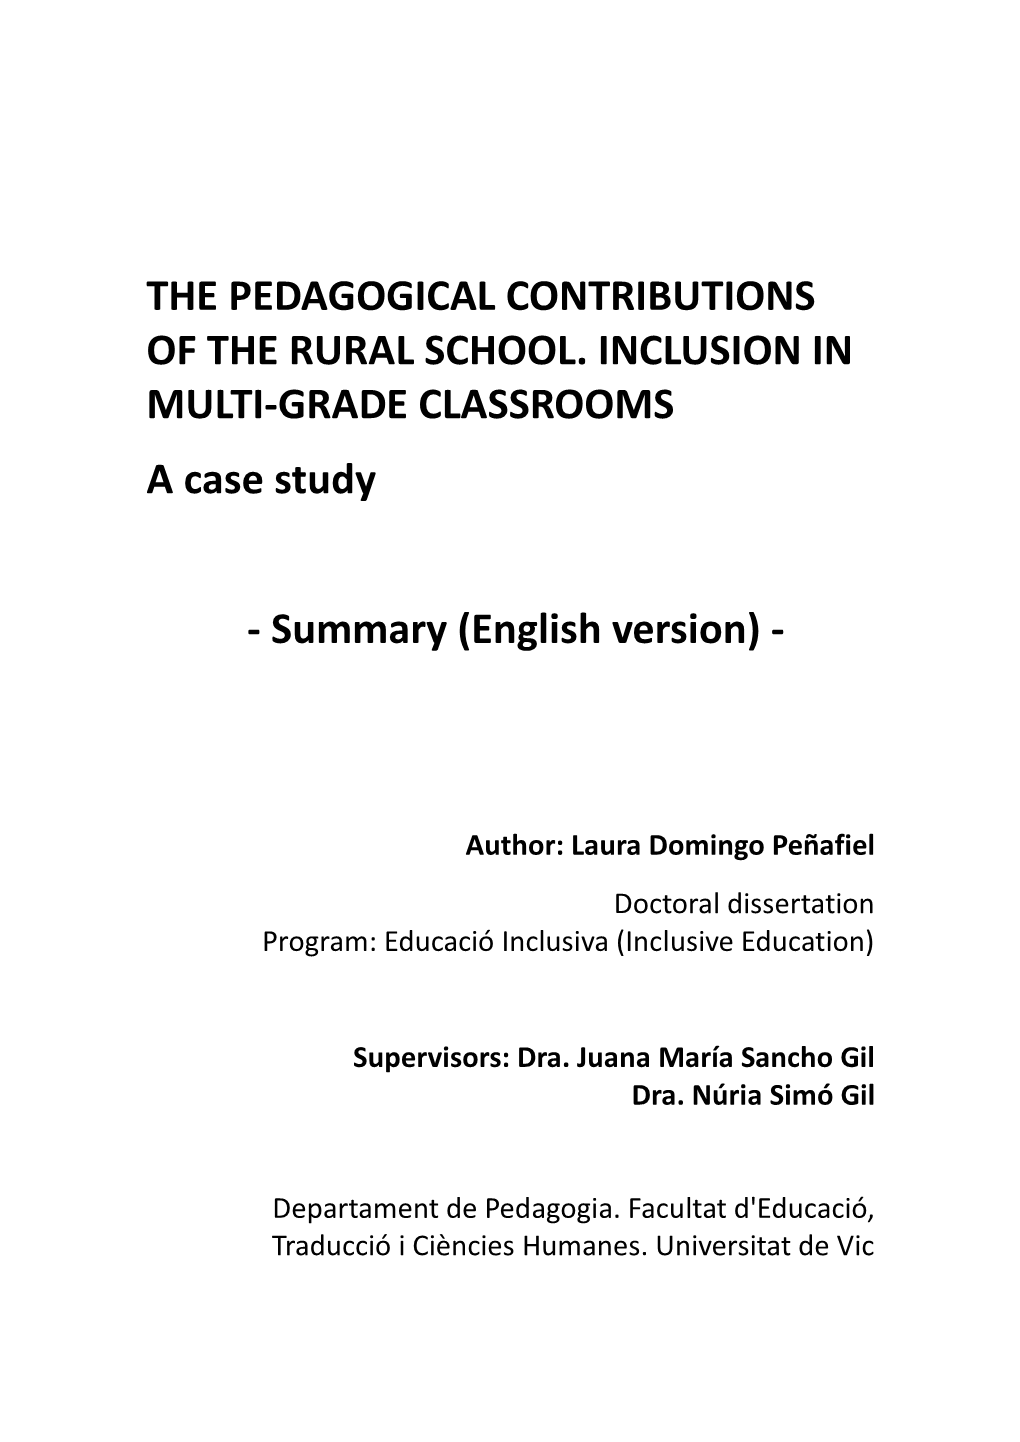 The Pedagogical Contributions of the Rural School